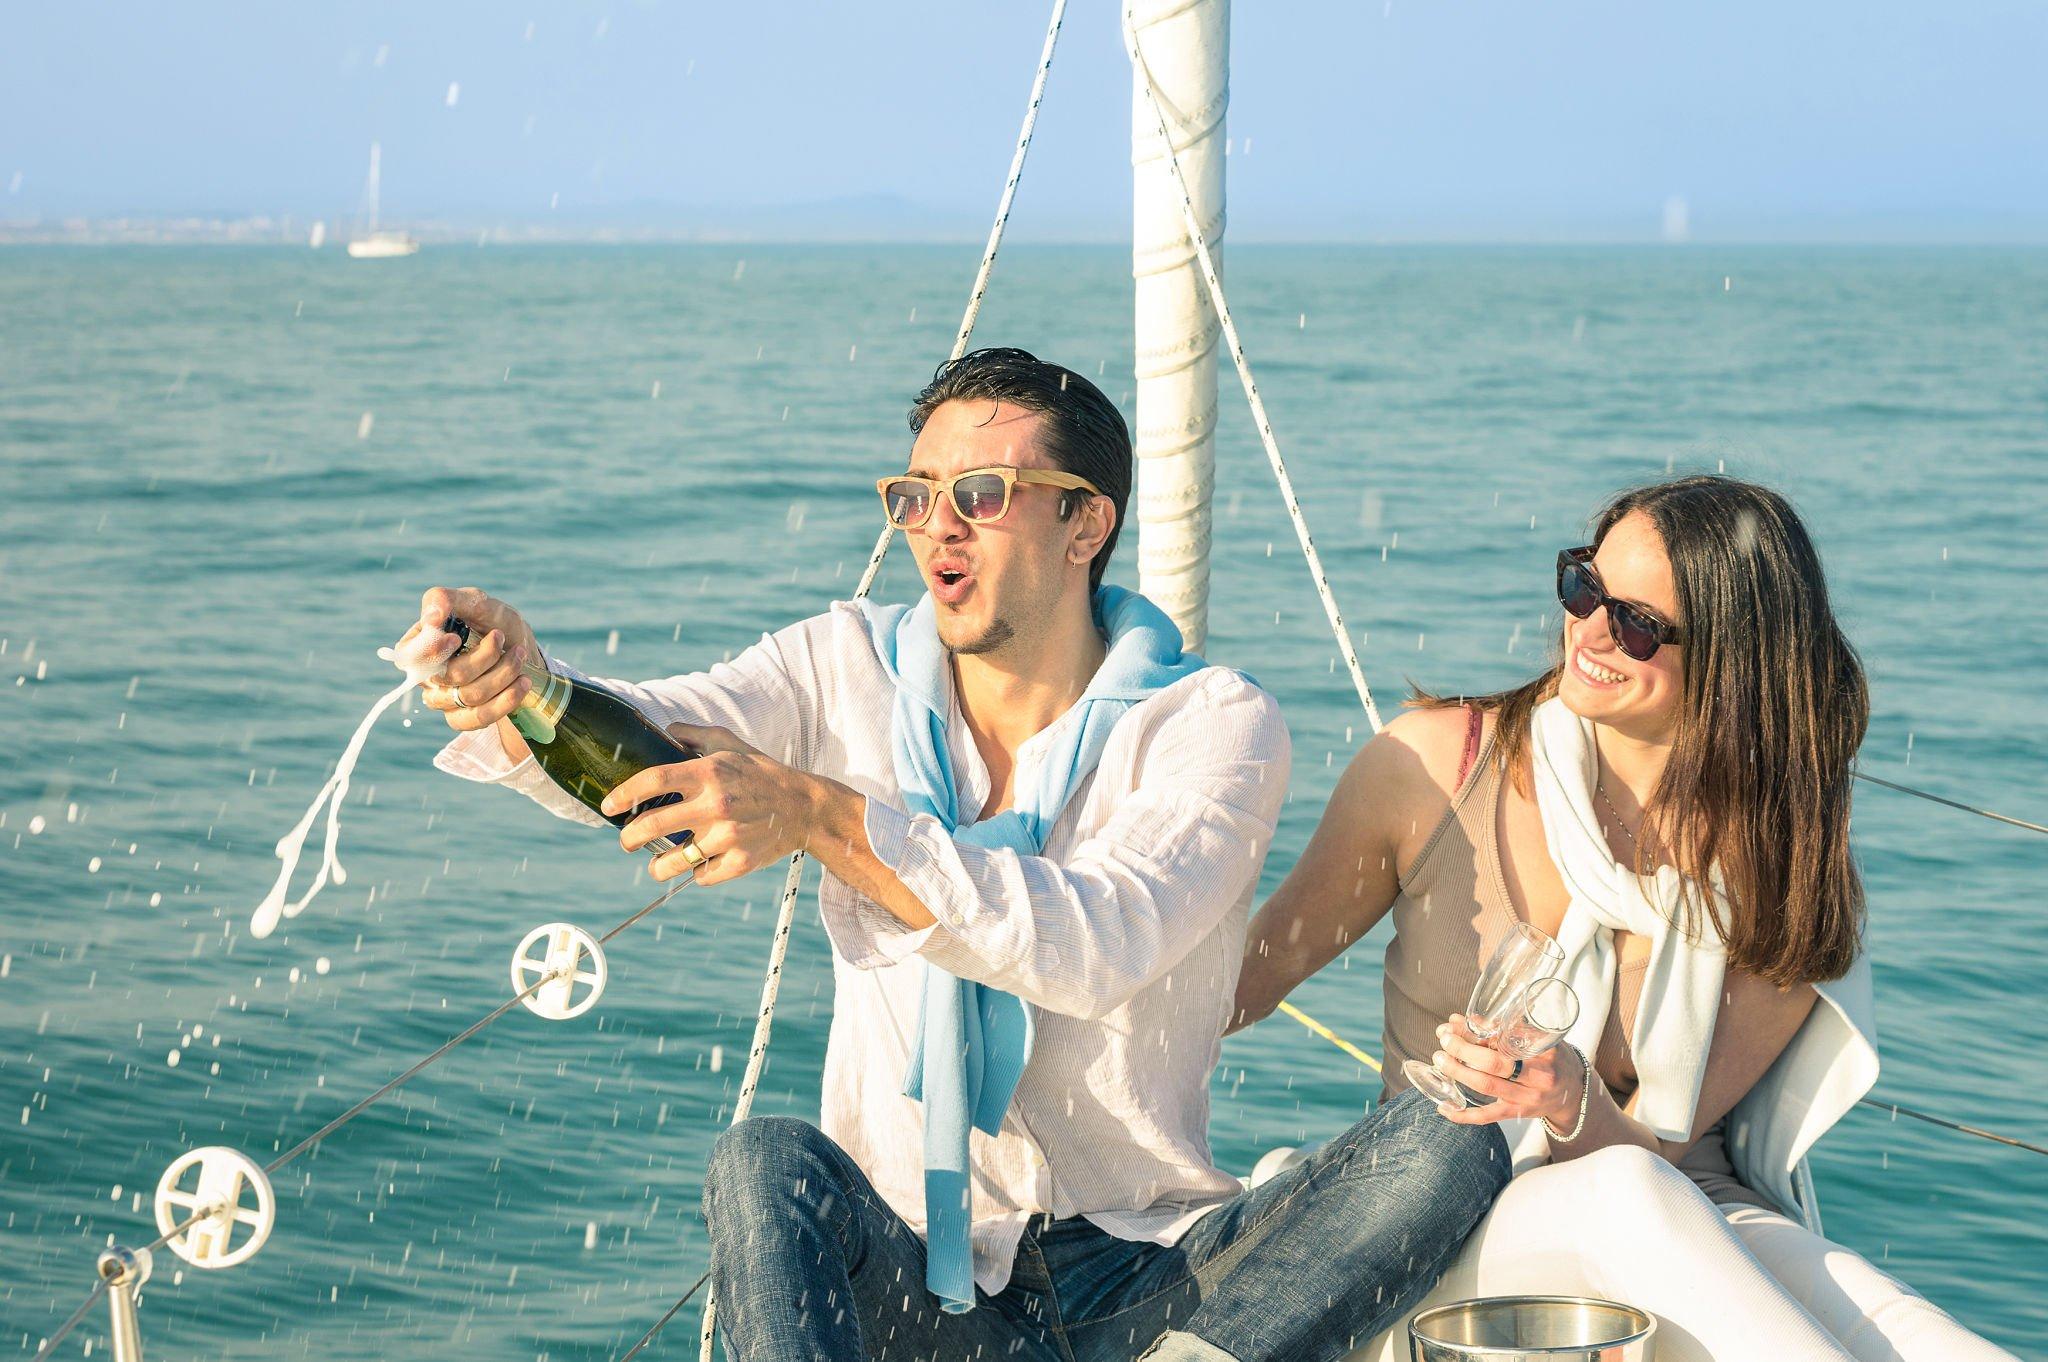 How to Rent a Boat for a Birthday Without Overpaying in Tenerife?